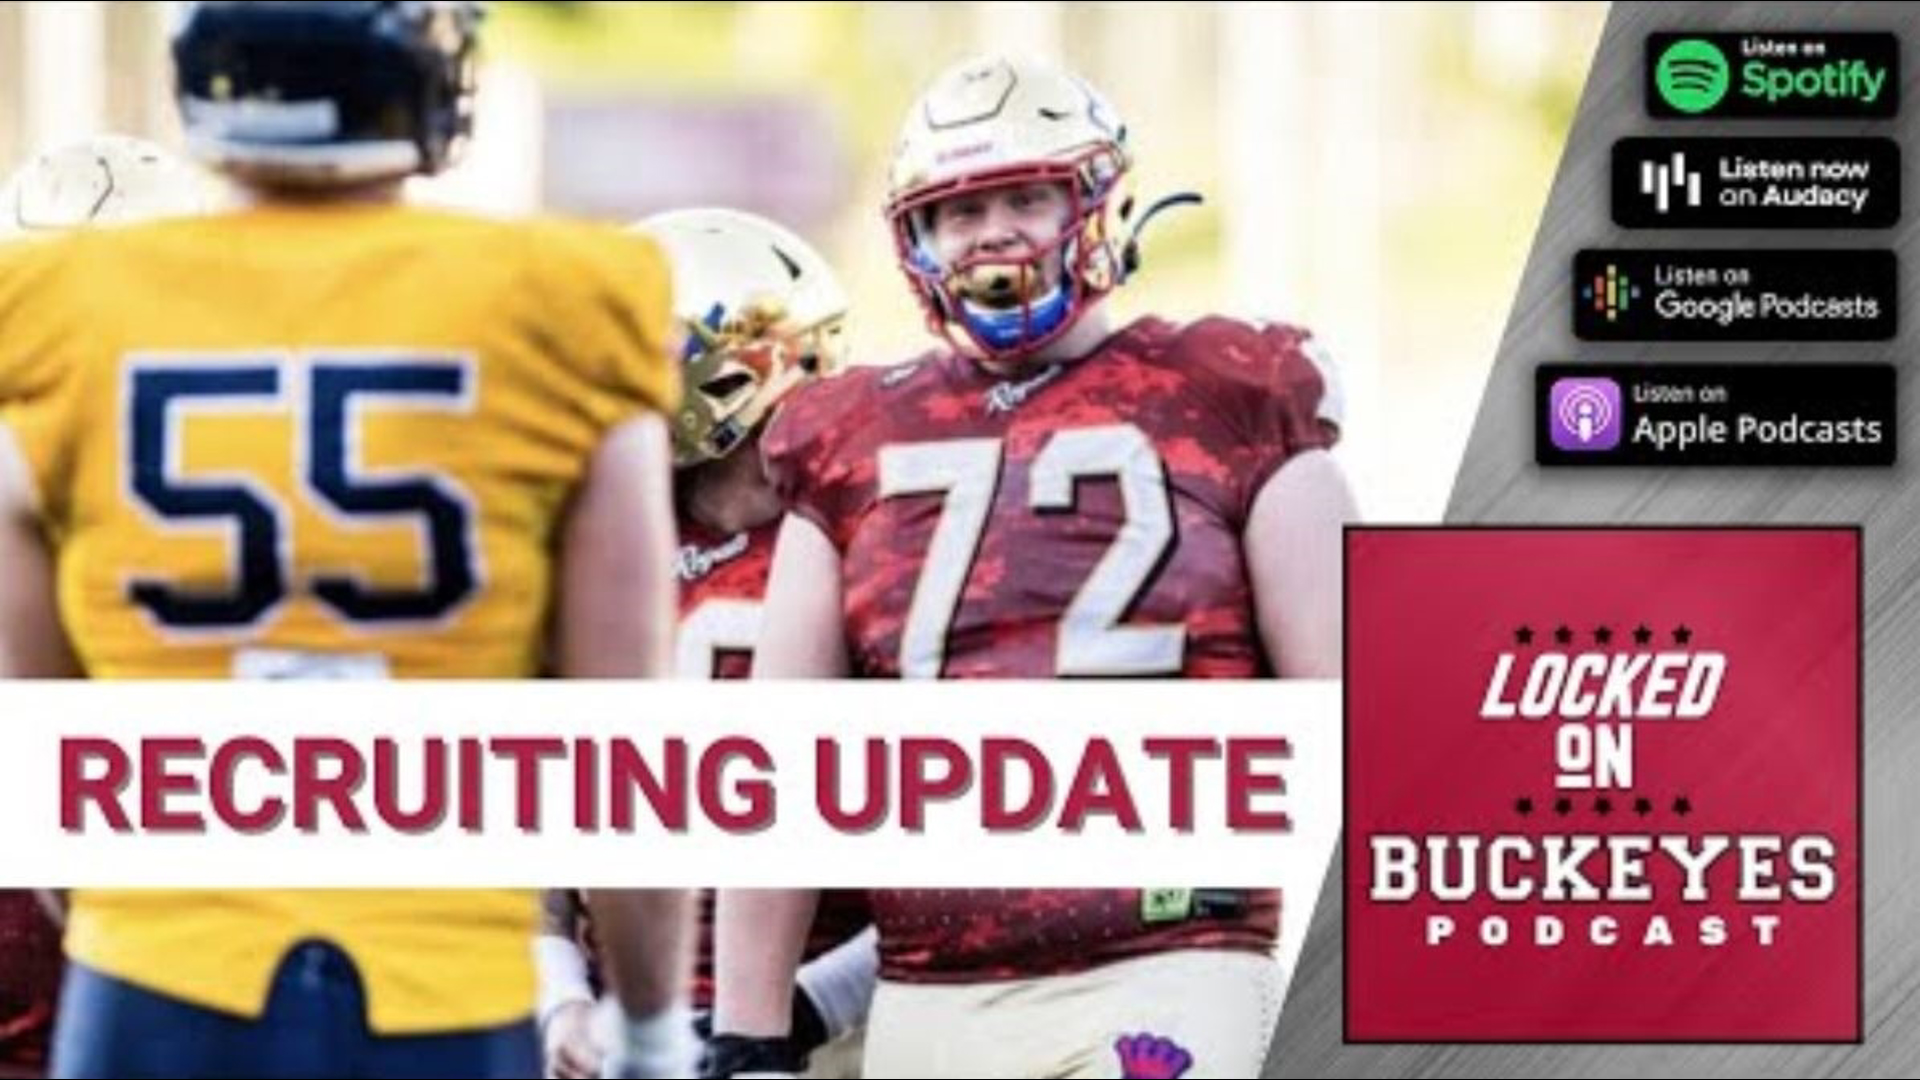 In this edition of the Locked On Buckeyes podcast, we explore what offensive lineman could join Austin Siereveld in Ohio State's 2023 recruiting class.